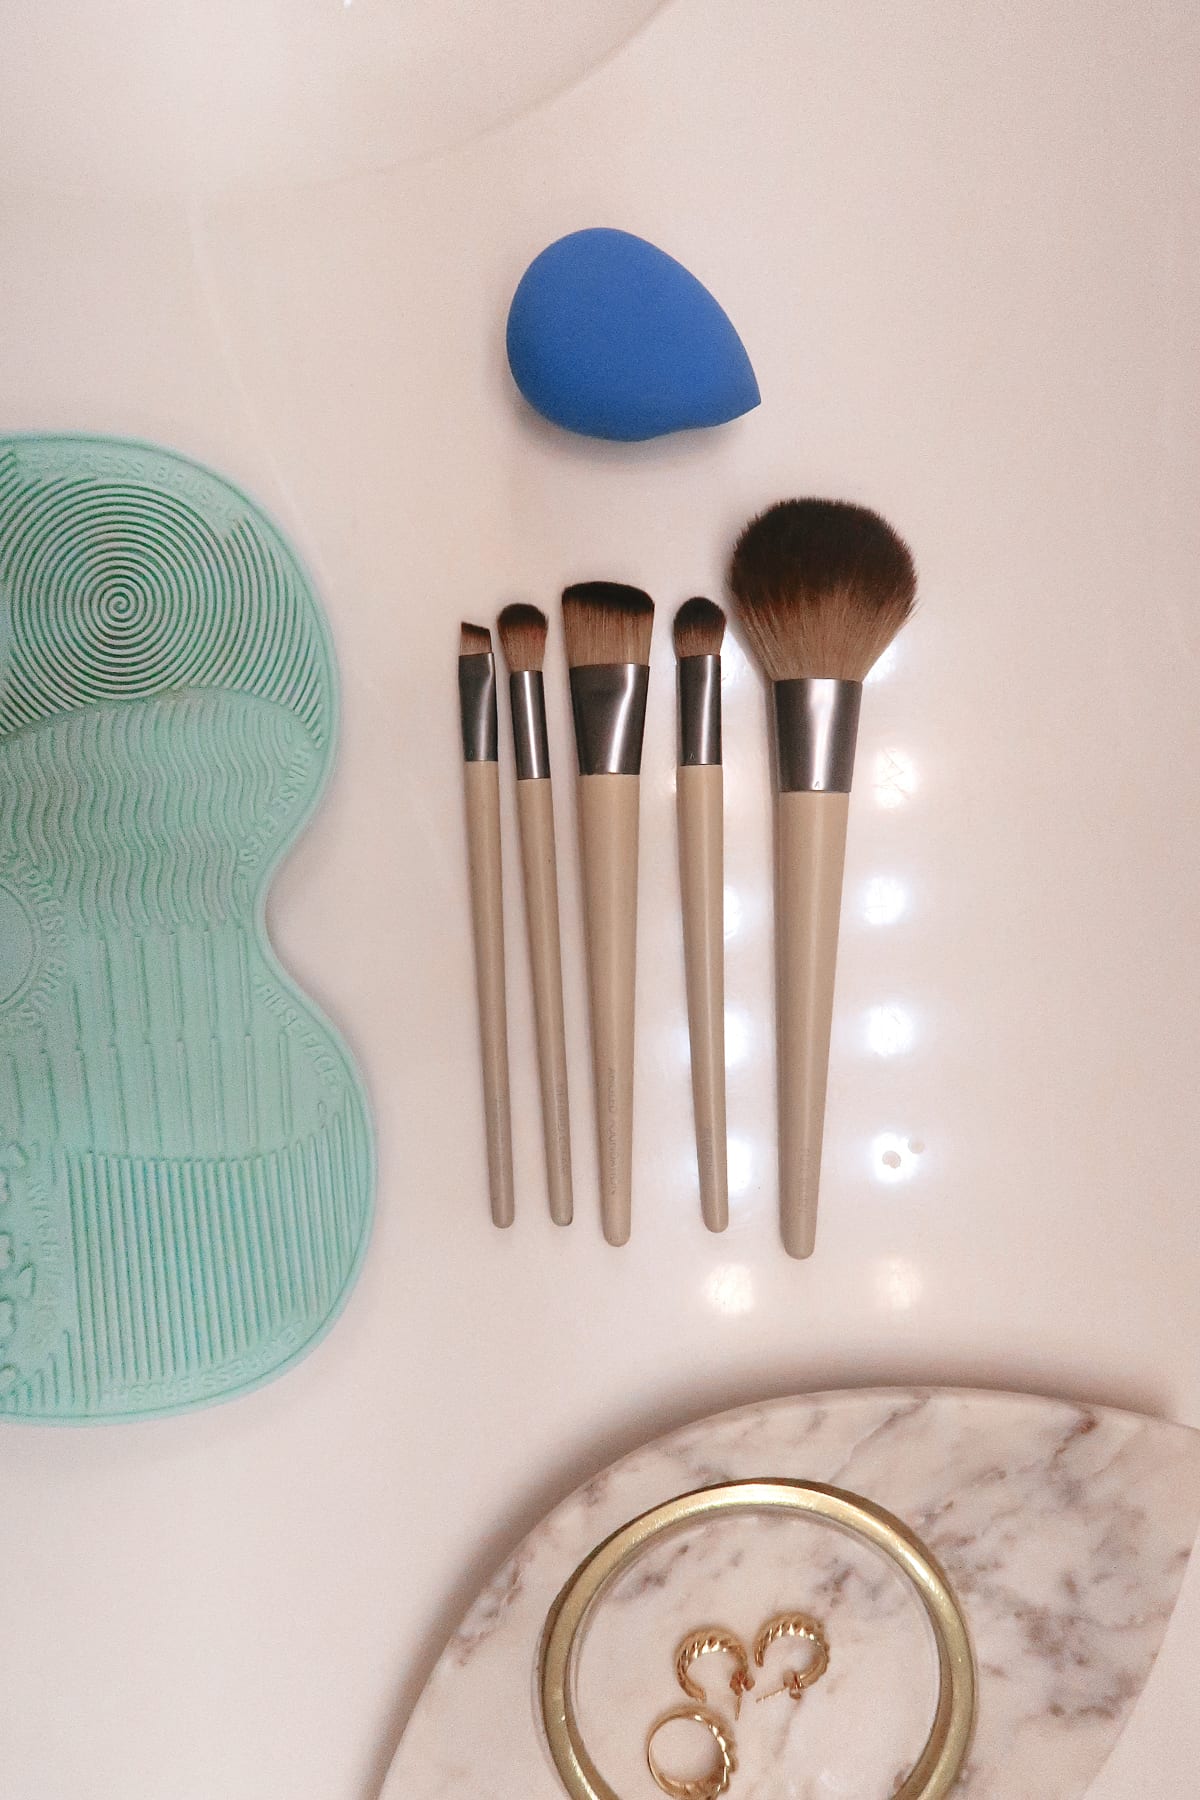 How to clean your makeup brushes and beauty blender